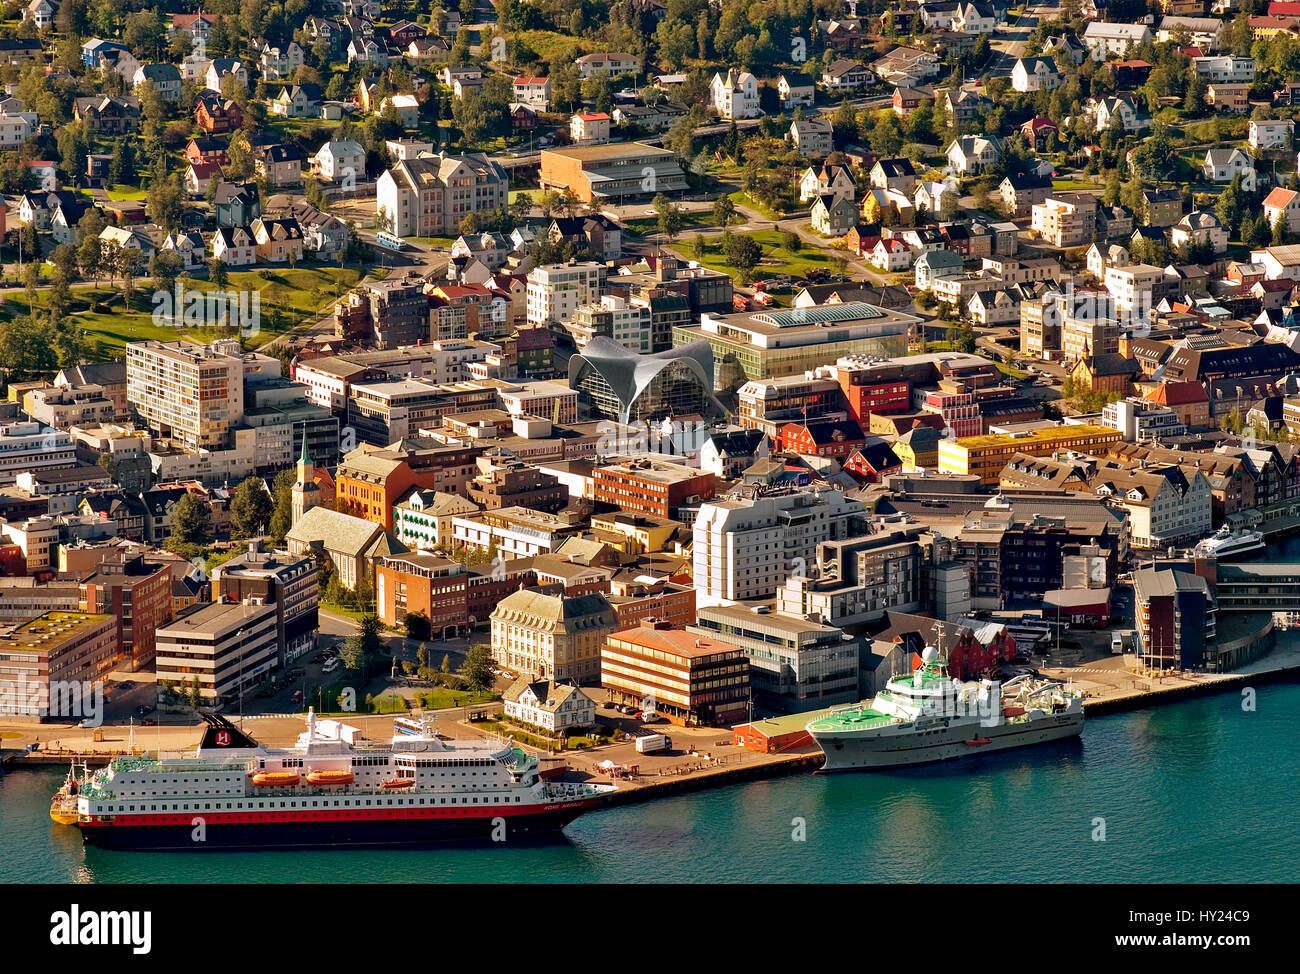 This stock photo shows the city and the harbor of Tromsoe in North Norway. The image was taken from the Storsteinen Mountain which is just above the c Stock Photo